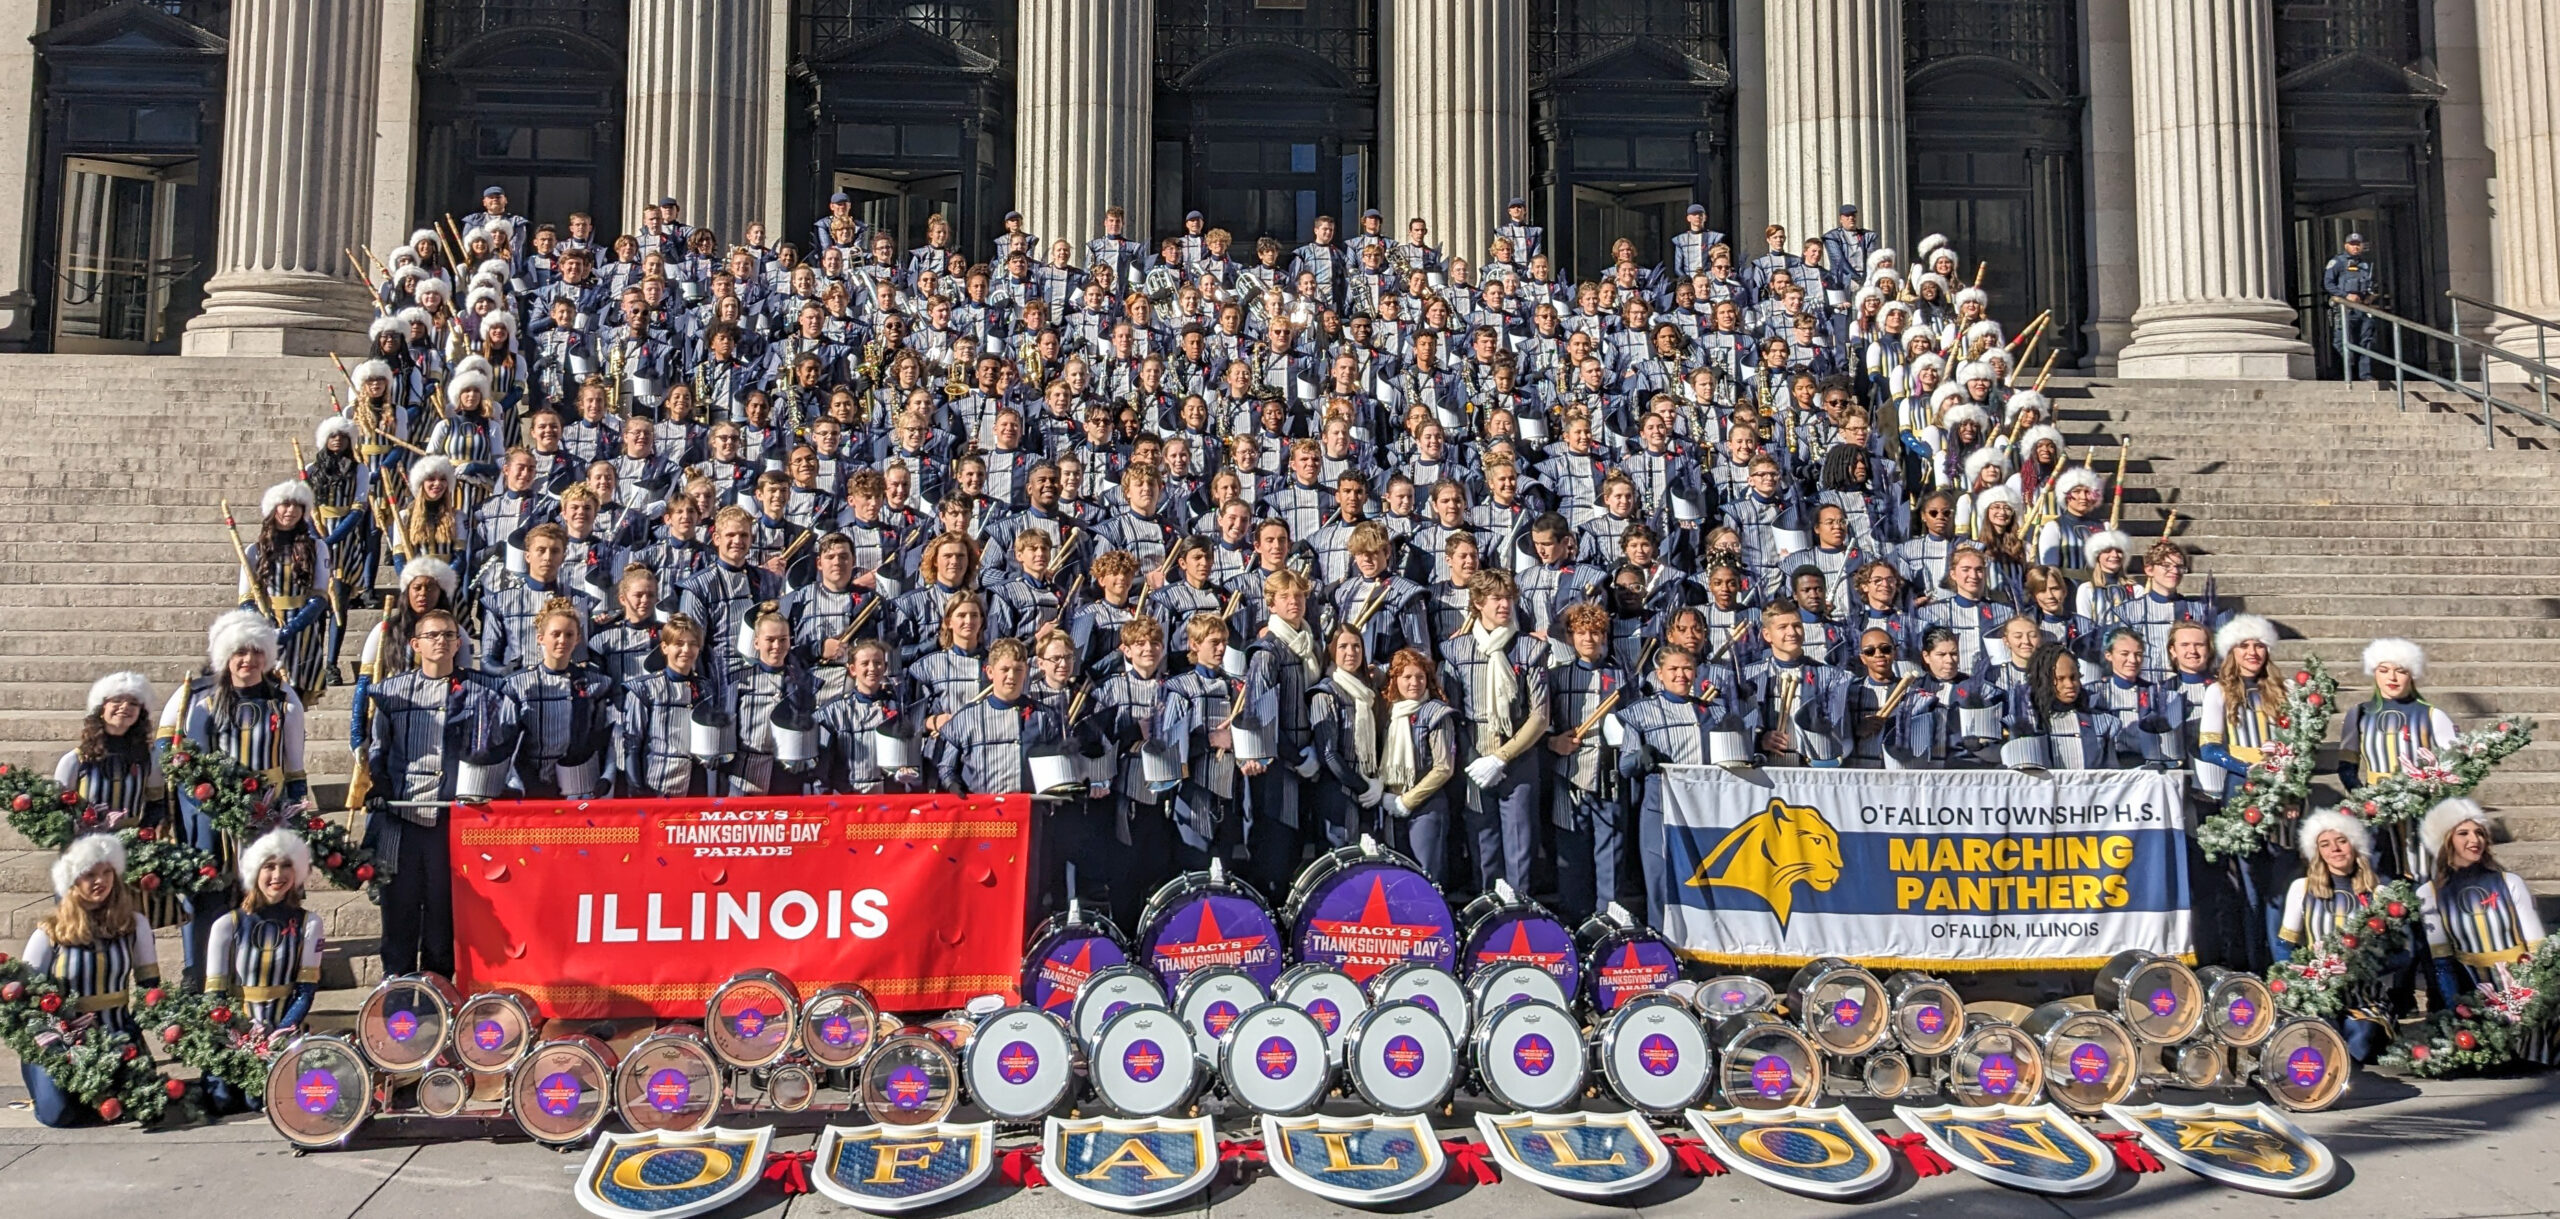 A large group of young adults standing on a tall set of stairs. They are all wearing navy blue and white marching band uniforms. There is signage in front of them that read 'O'Fallon'